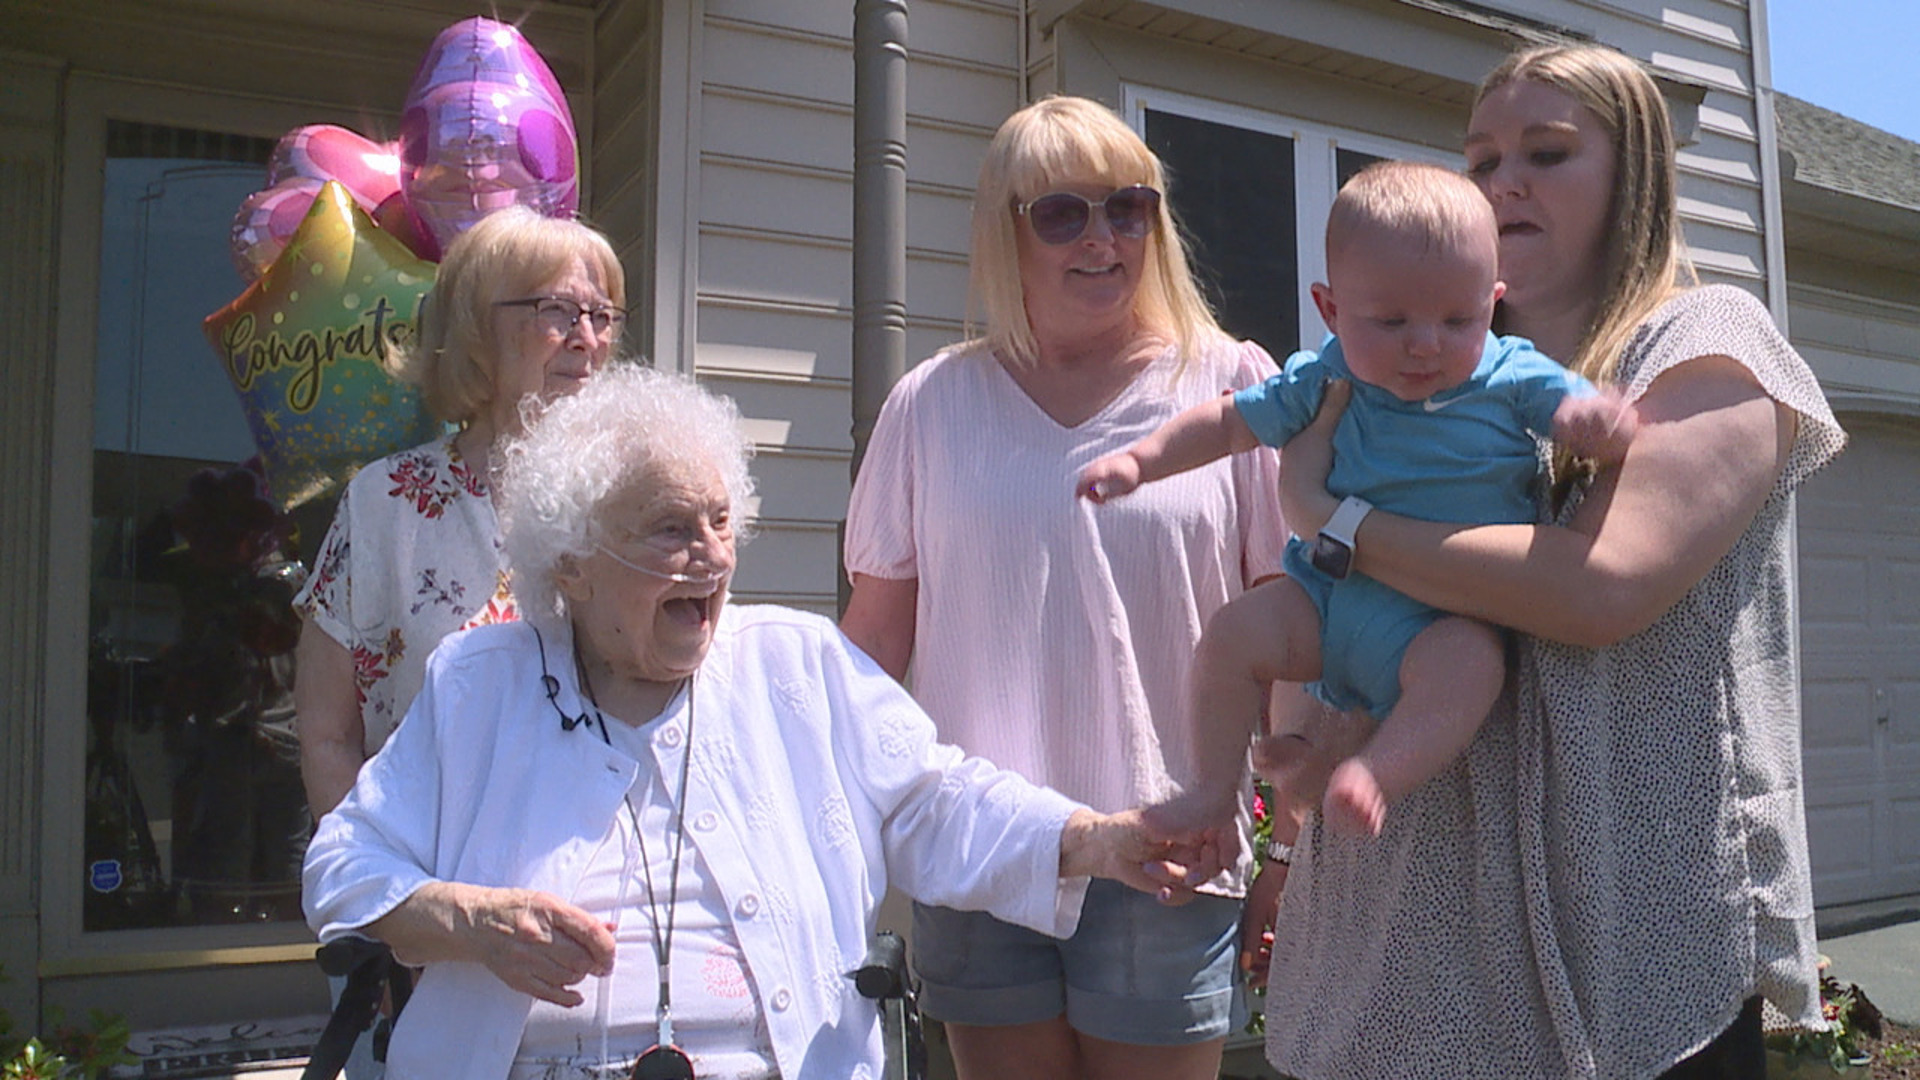 Family and friends gathered in East Manchester Township on Sunday to celebrate the birthday of Nelda Crump.